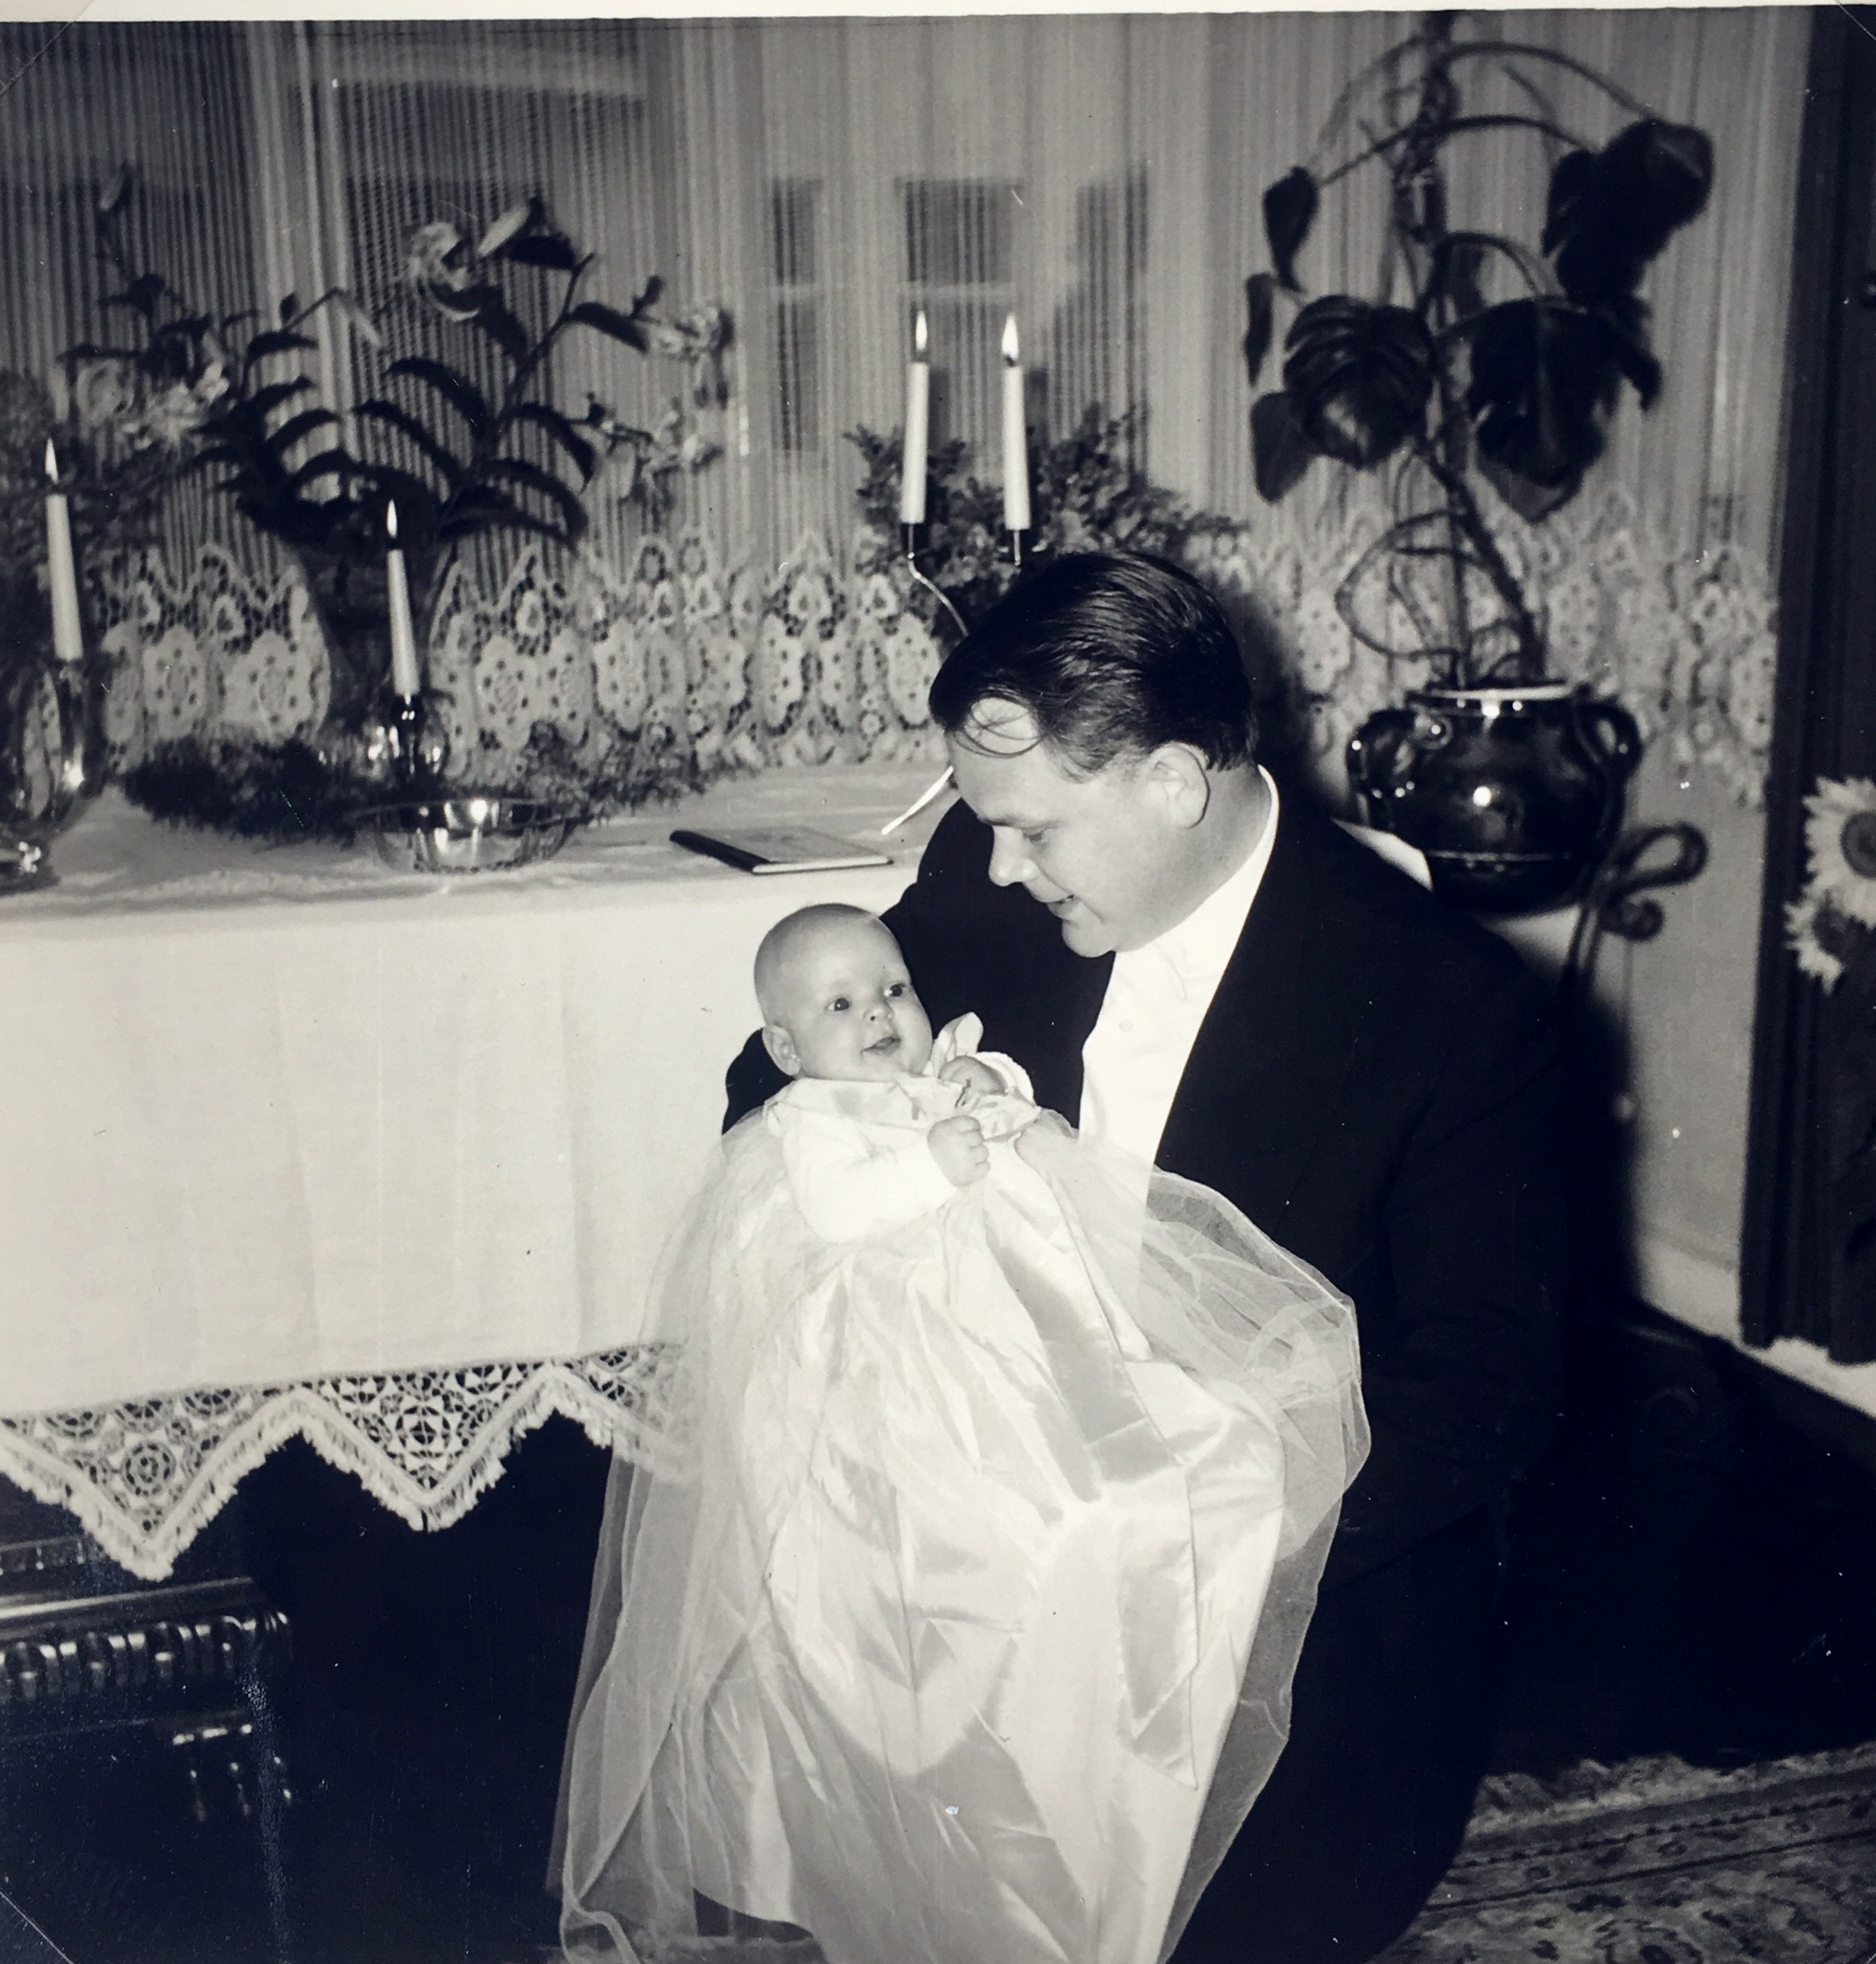 My Dad and I on my baptism, Bremen, Germany 1959.